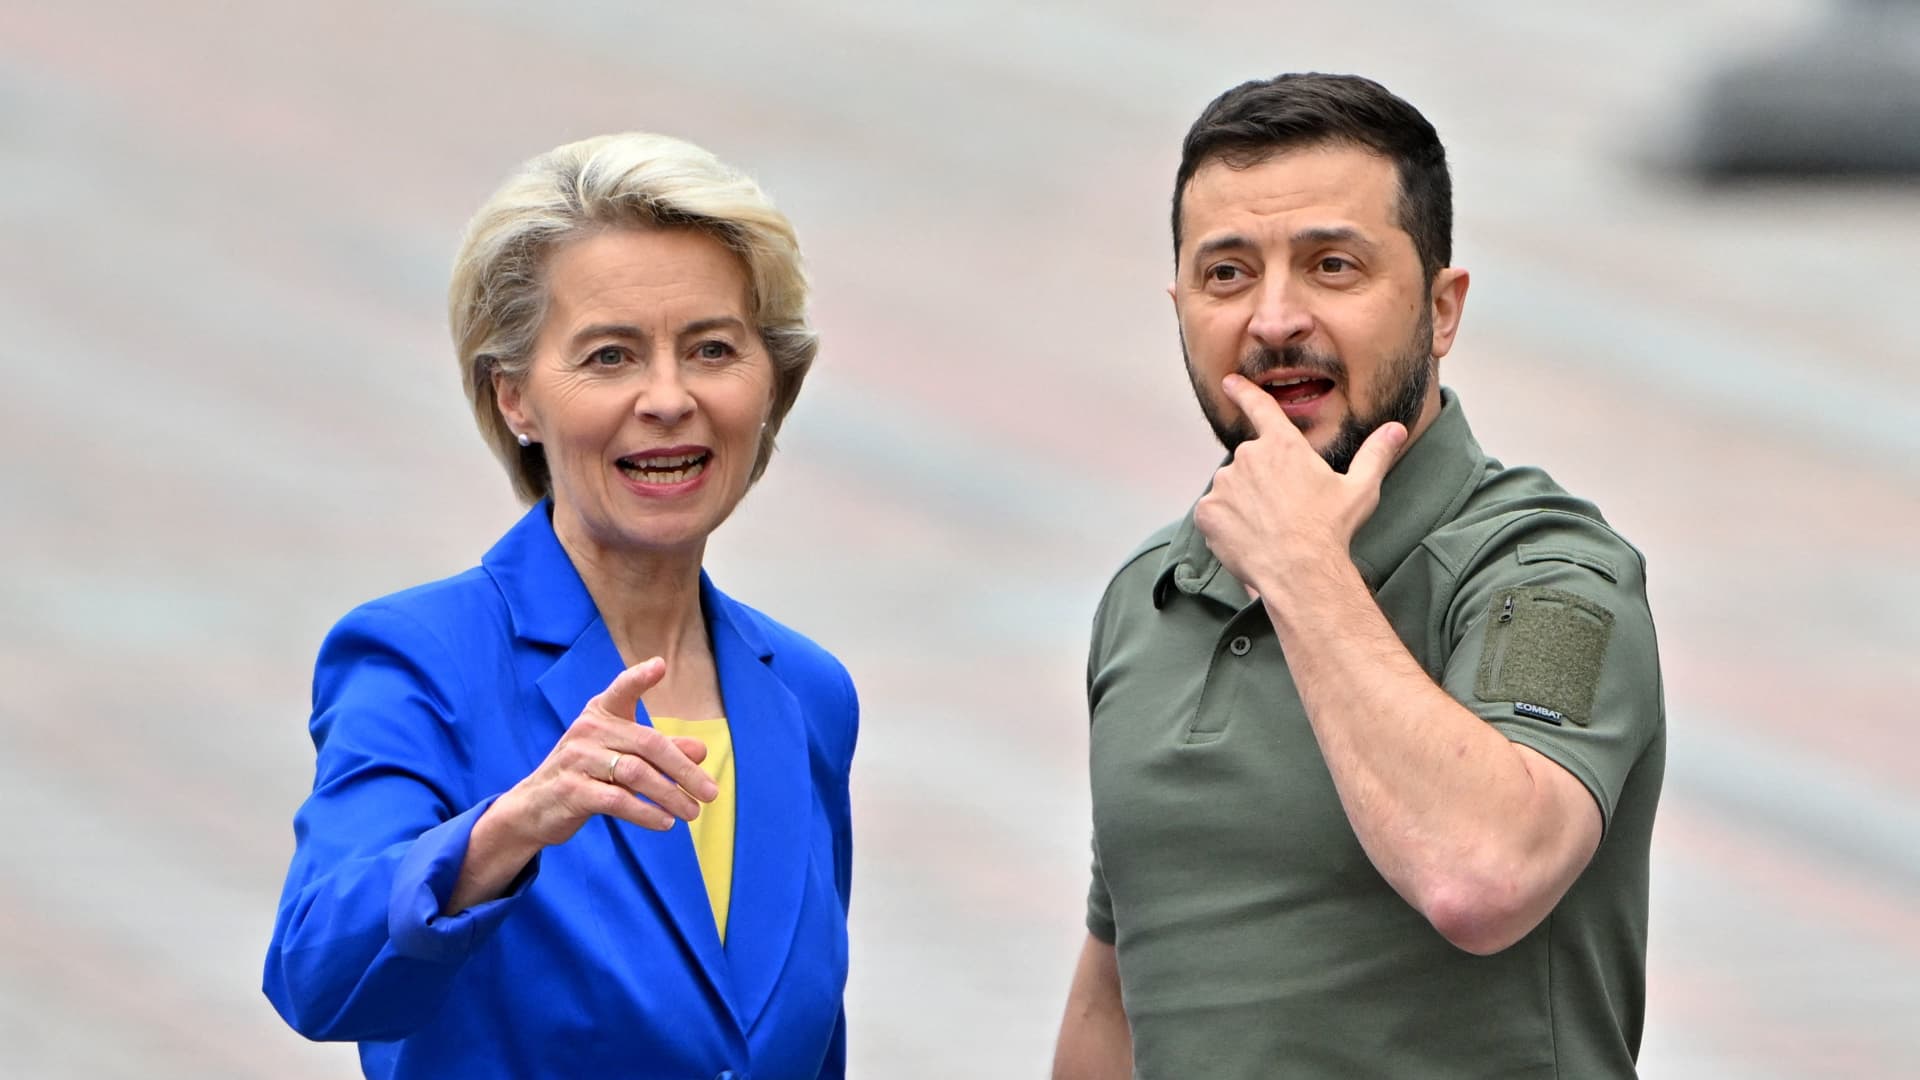 Ukrainian President Volodymyr Zelensky (R) speaks with the President of the European Commission Ursula von der Leyen after a press conference following their talks in Kyiv on September 15, 2022.